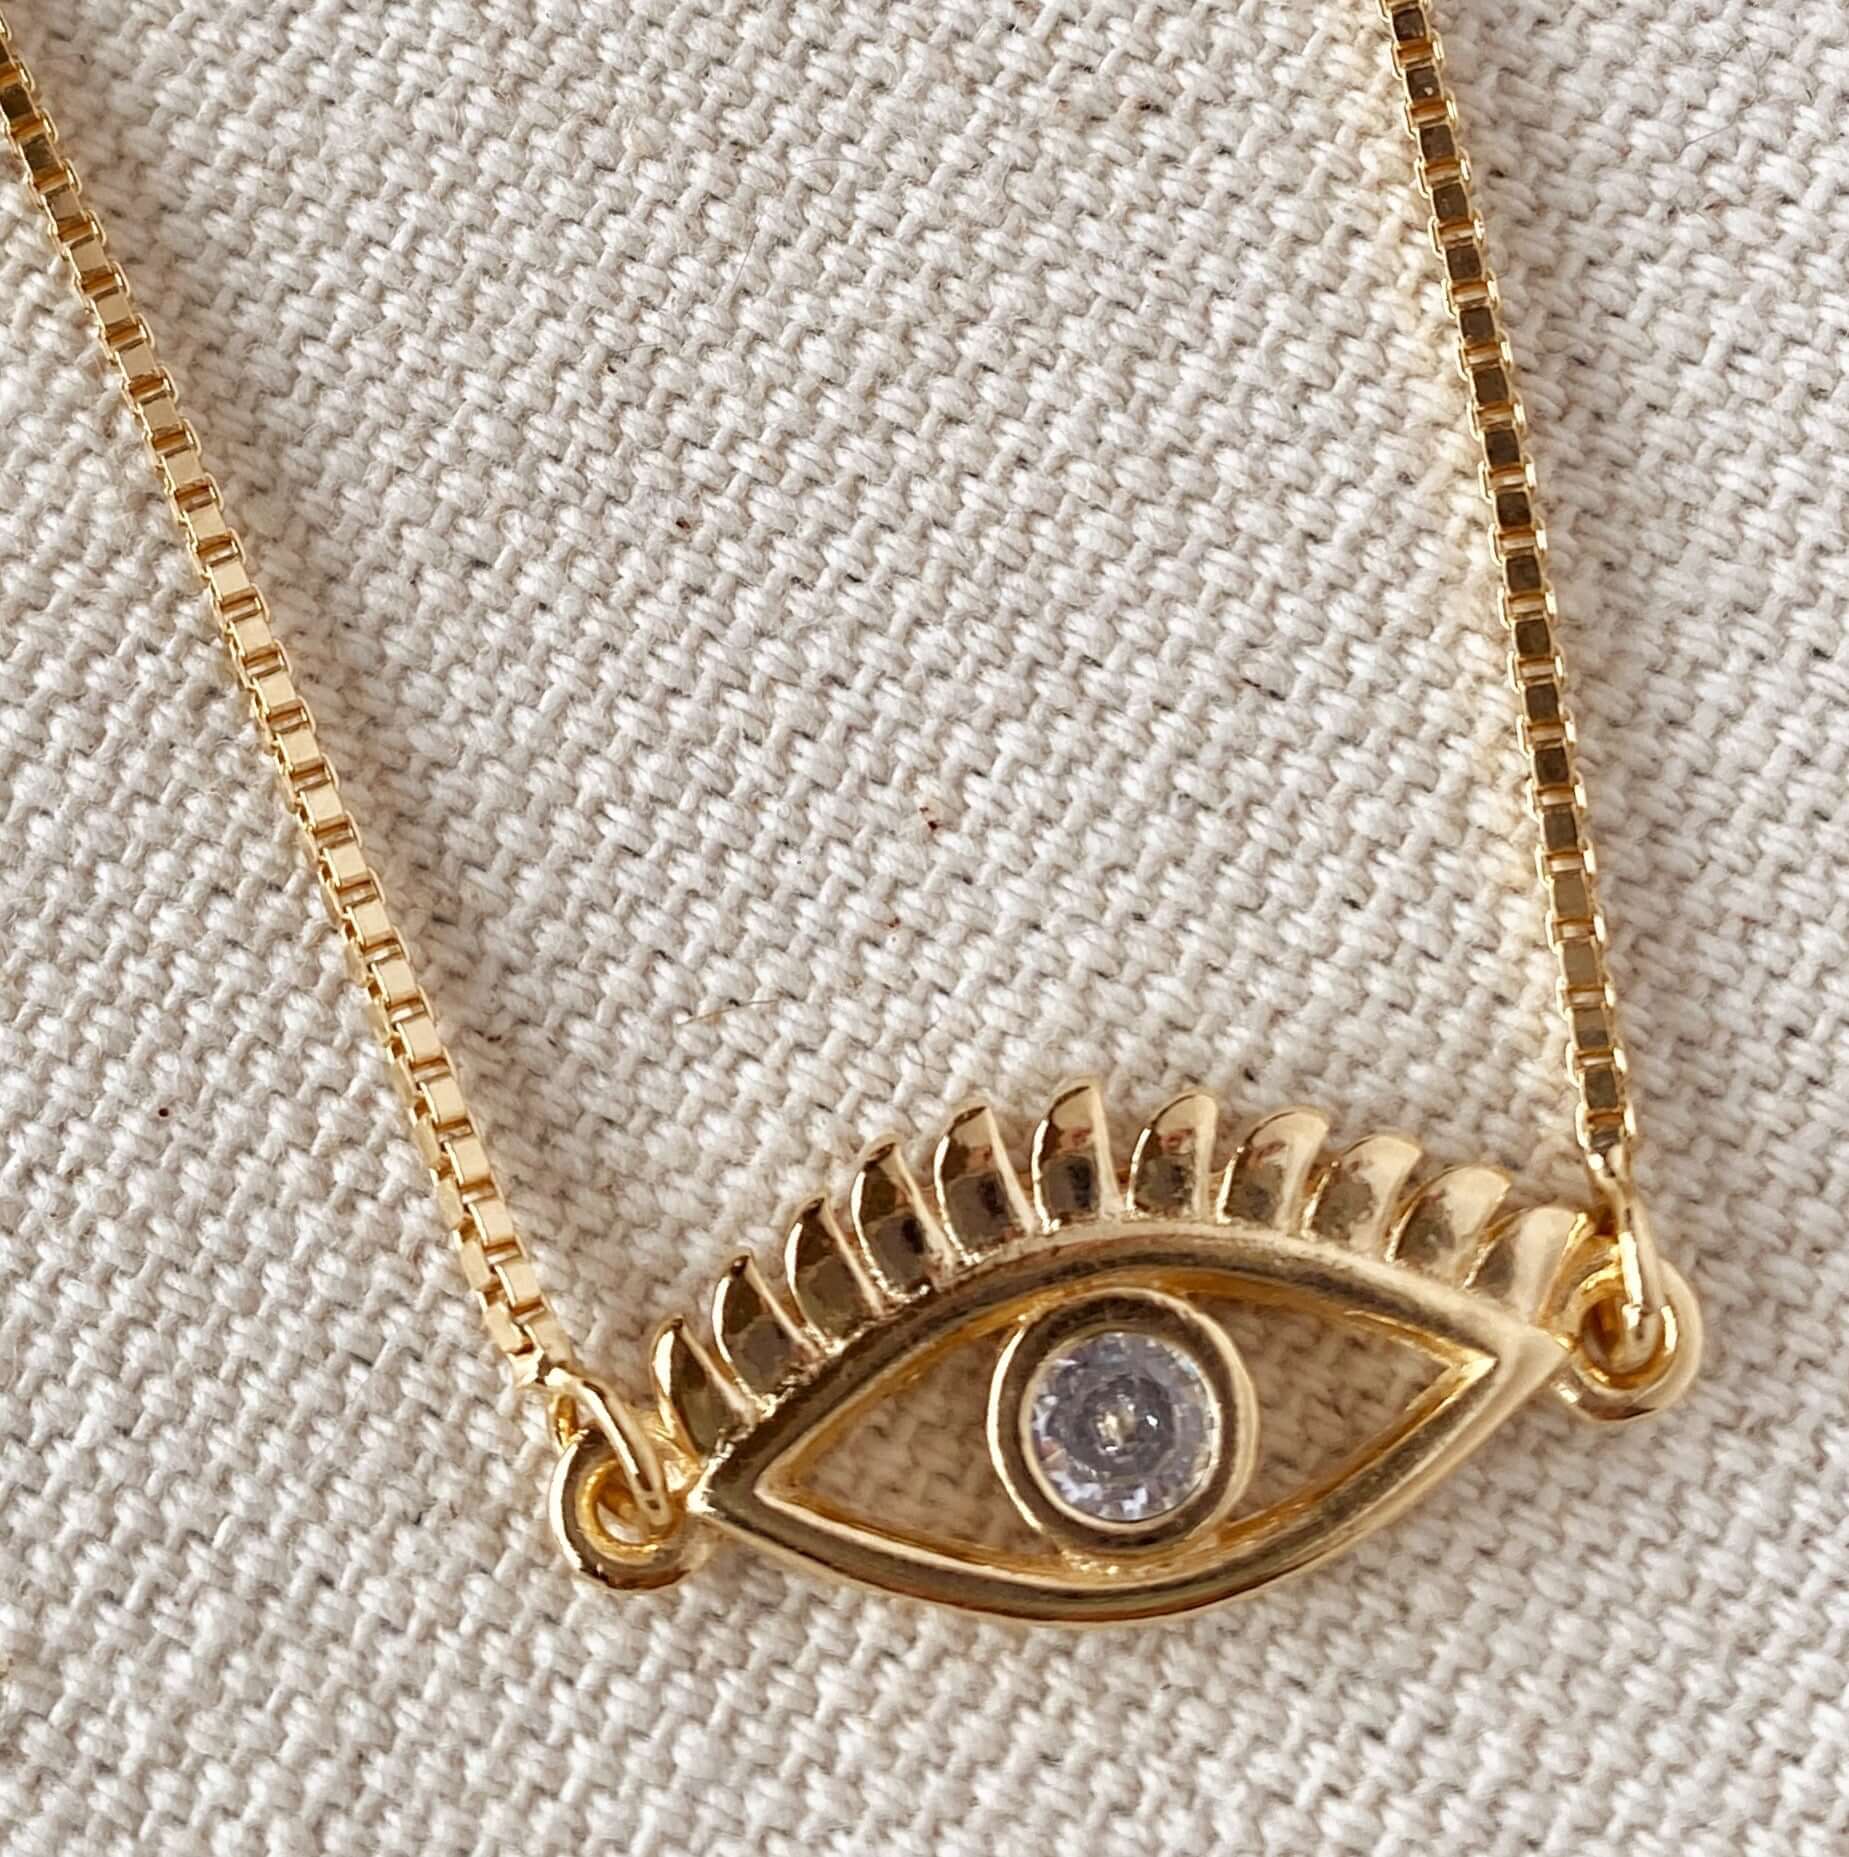 Gold Evil Eye Necklace with Cubic Zirconia